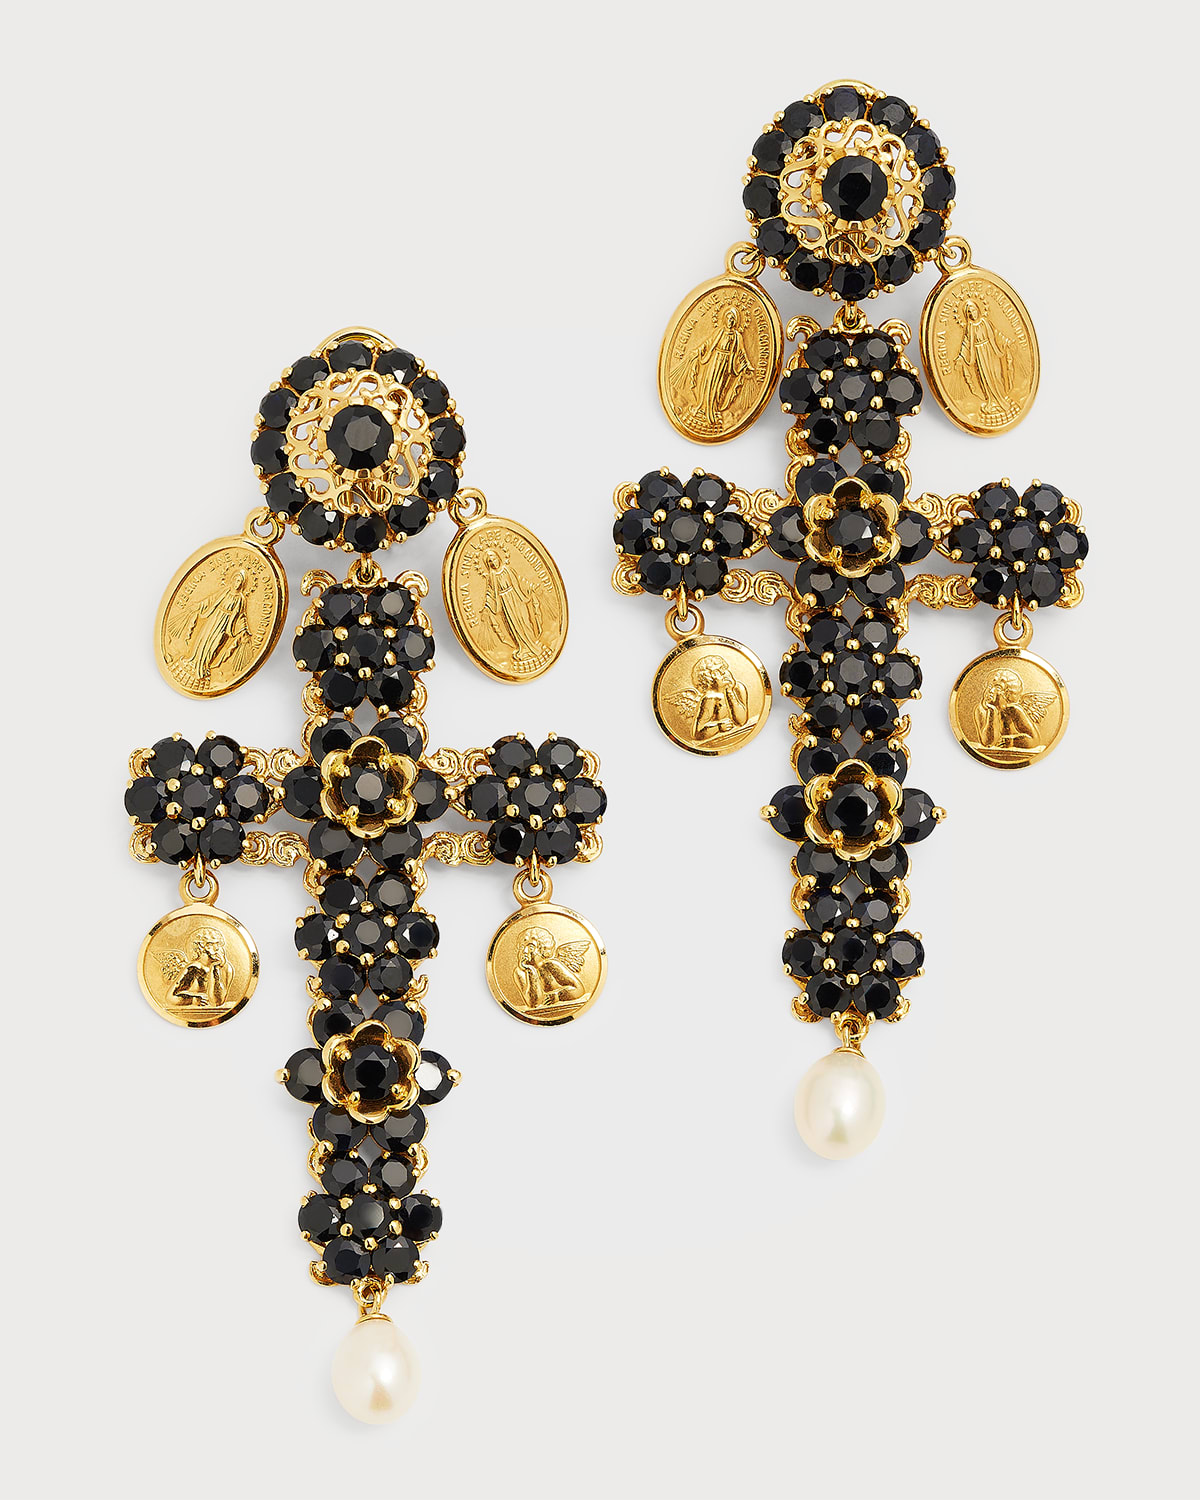 Dolce & Gabbana 18K Yellow Gold Cross Clip Earrings with Virgin Mary, Black Sapphire and Freshwater Pearls